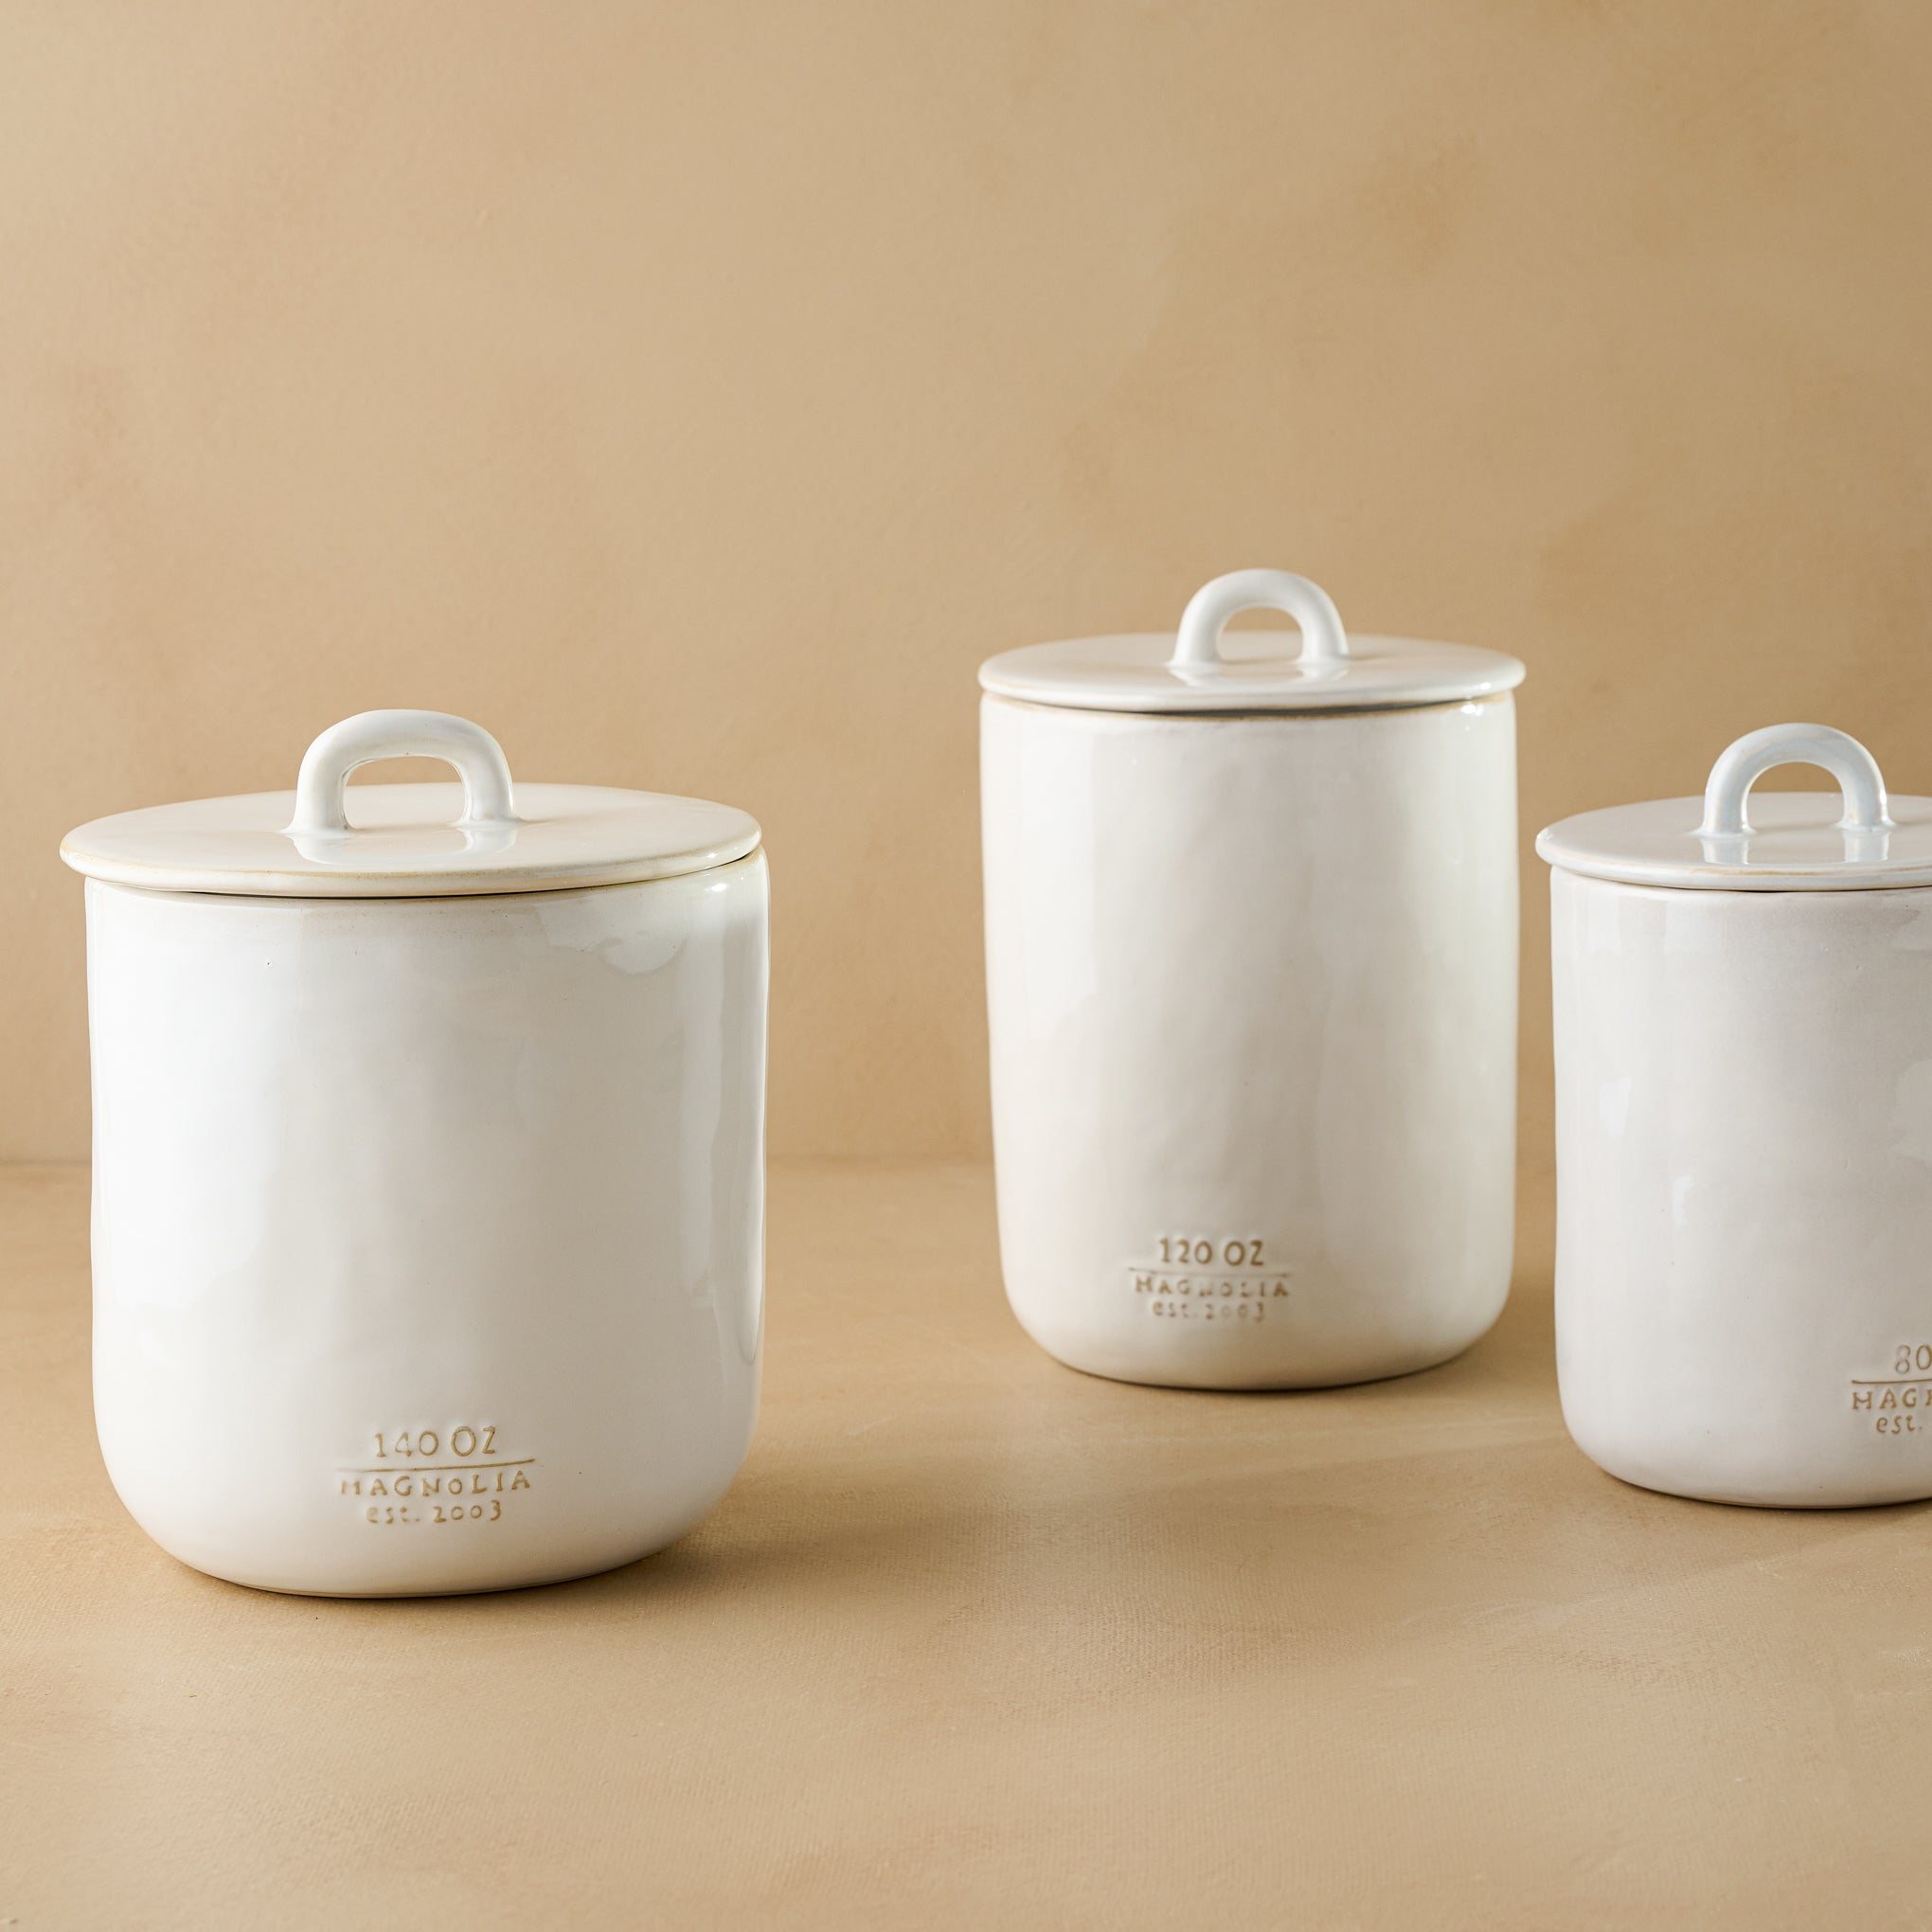 Mia Ceramic Canister in all three sizes